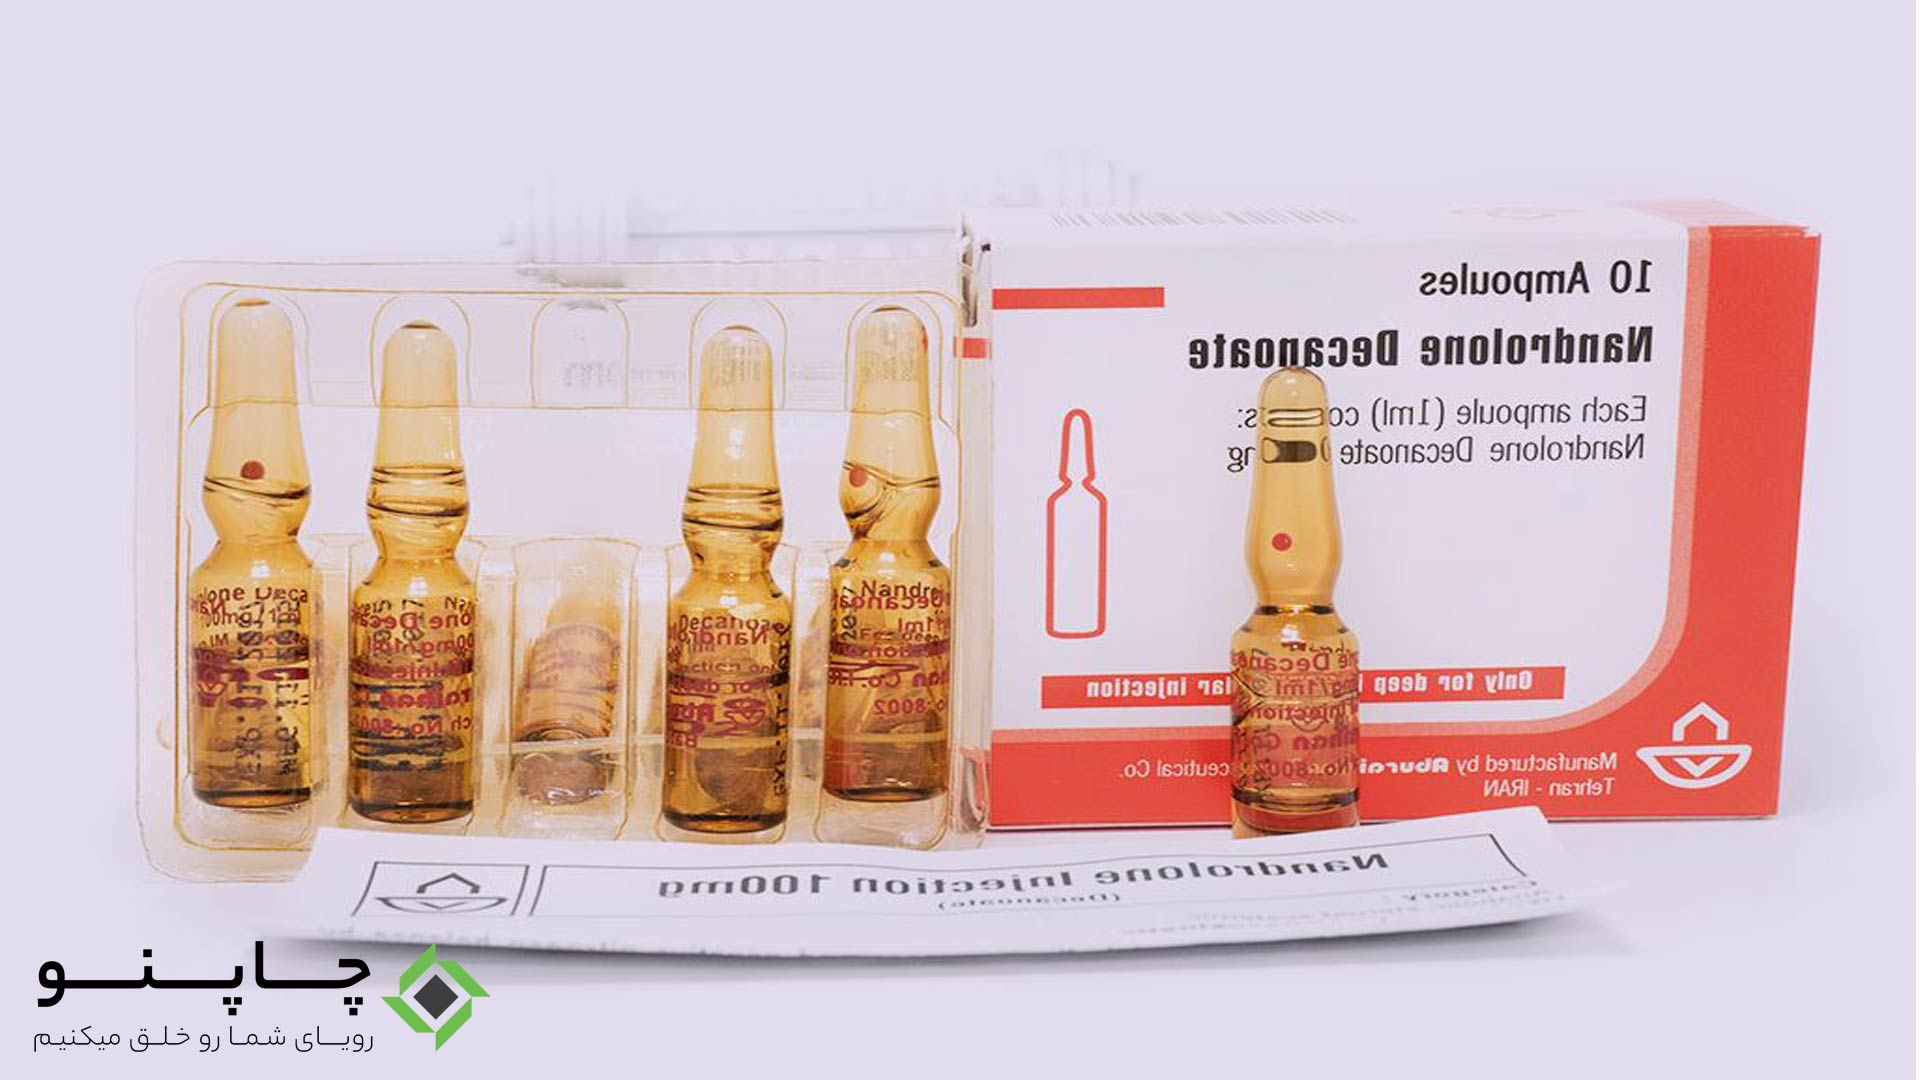 Packaging Of Ampoules